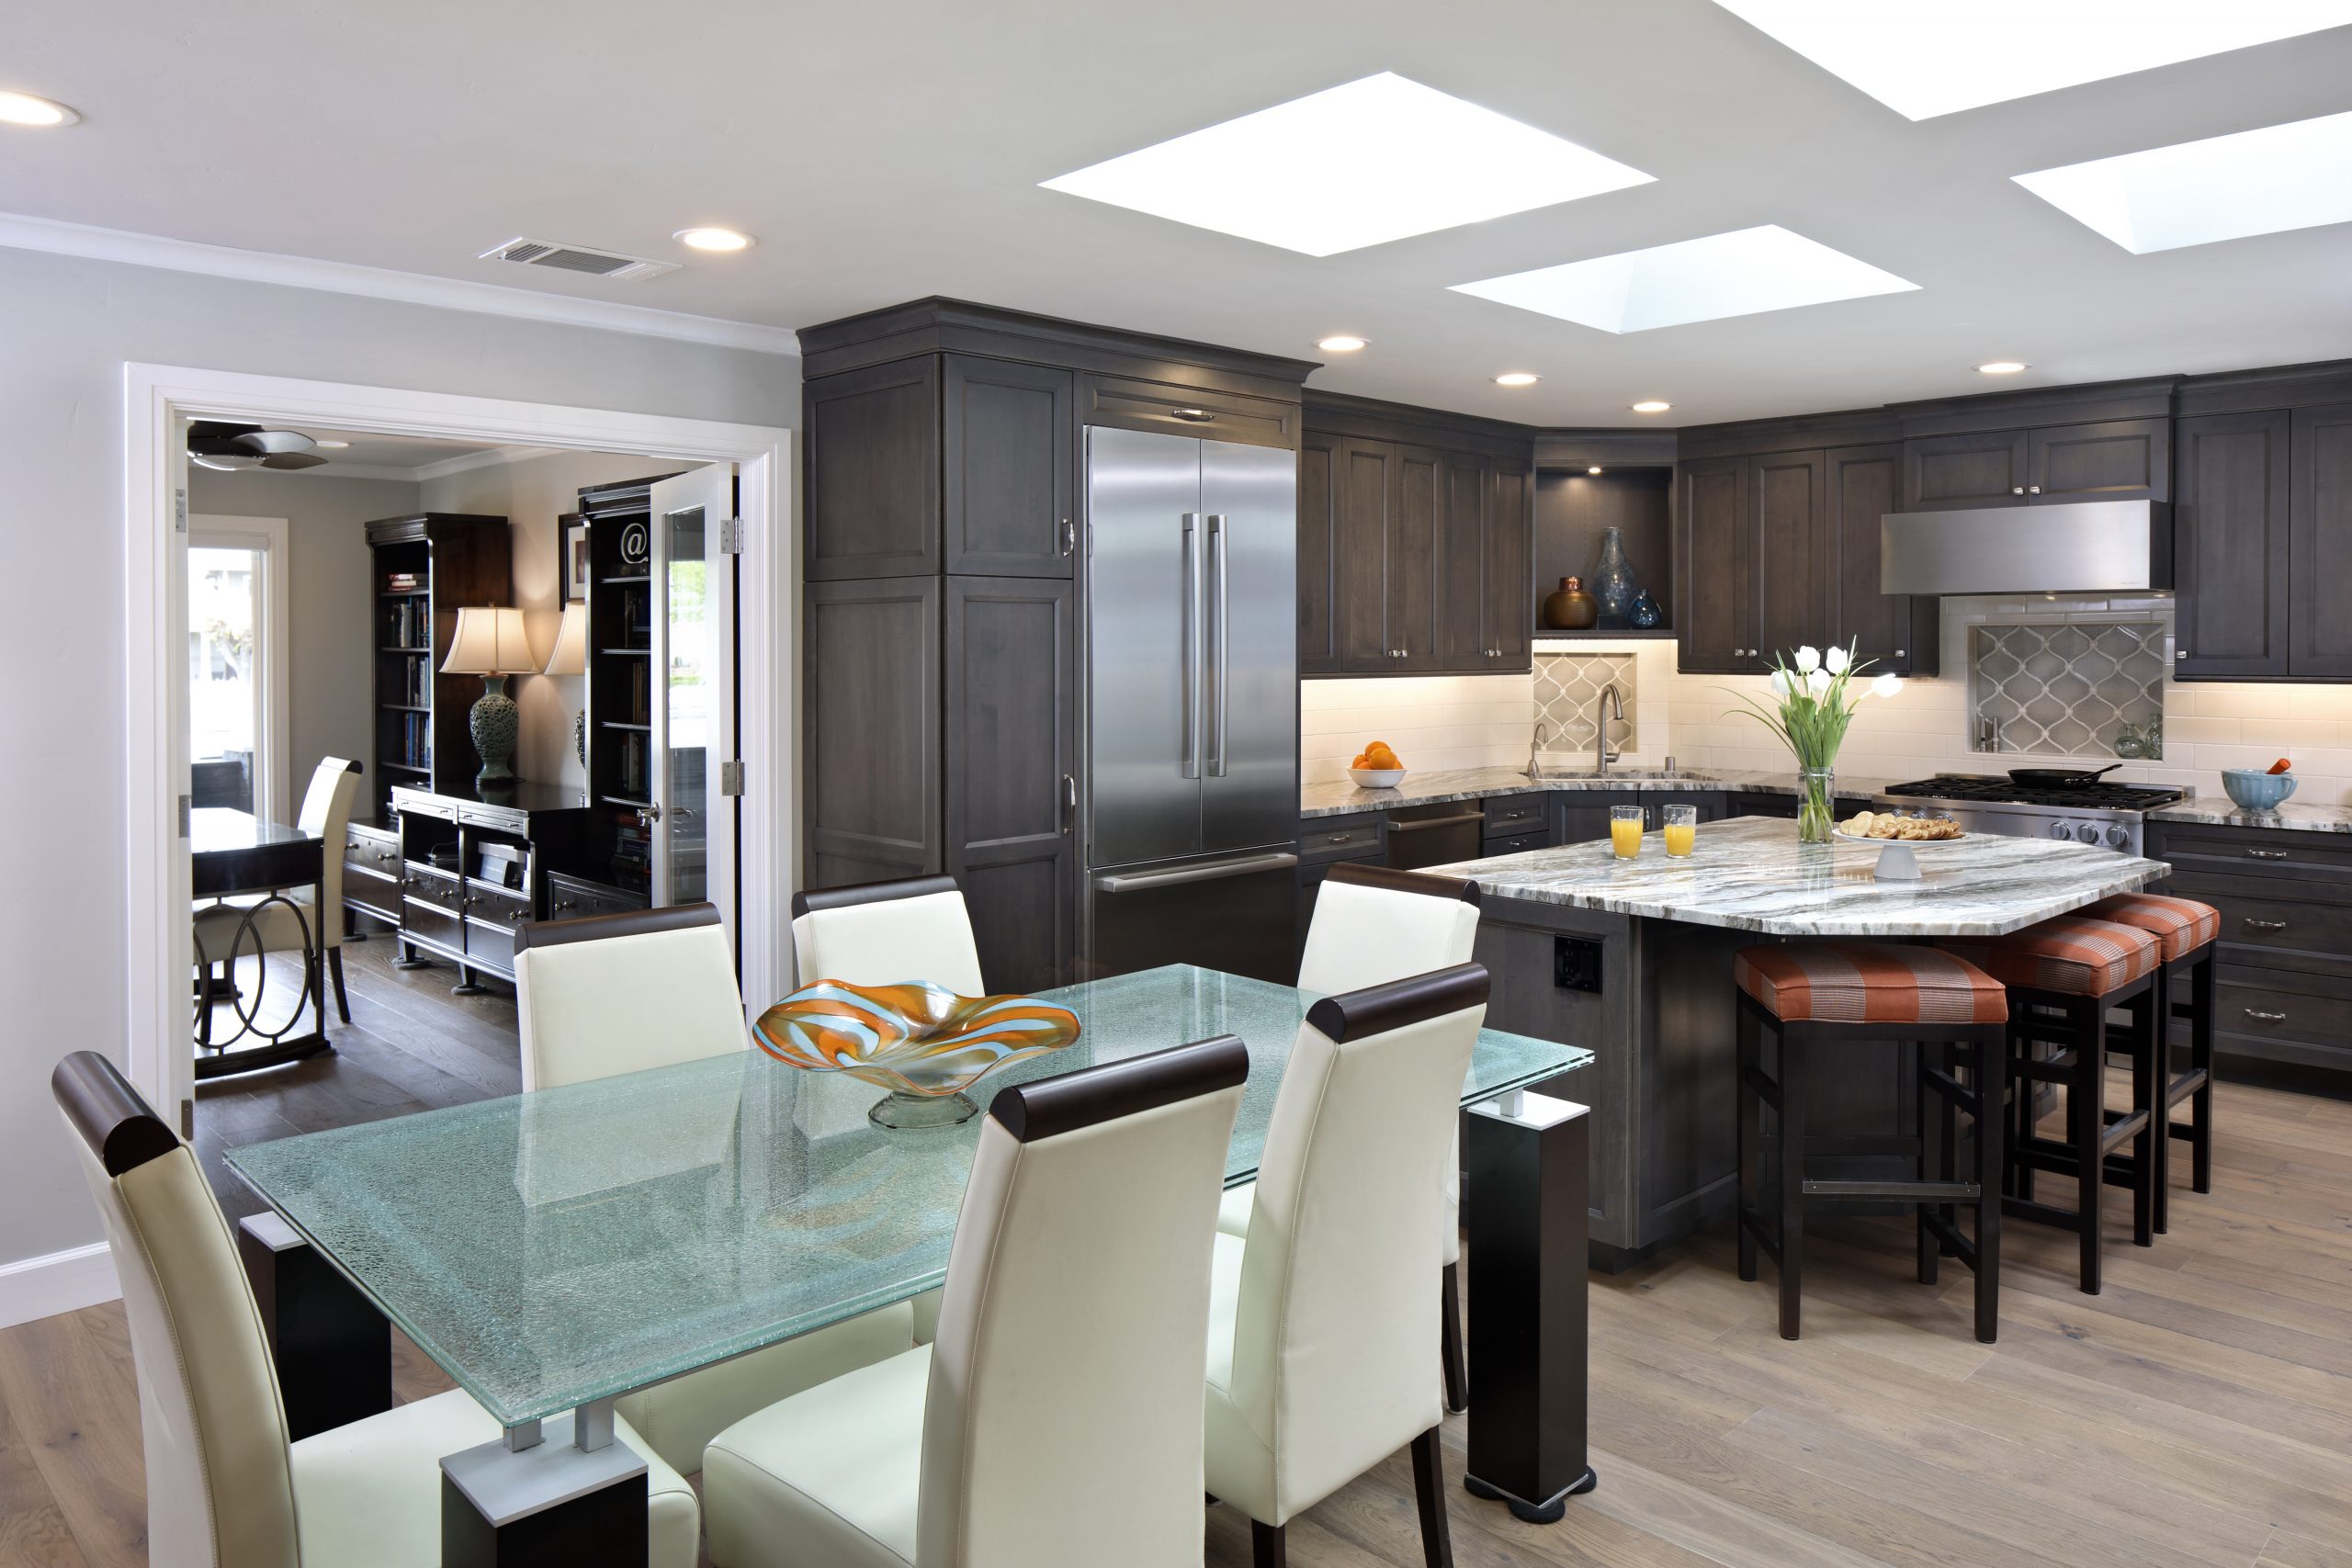 A kitchen and living room combination with a large granite island and glass table.